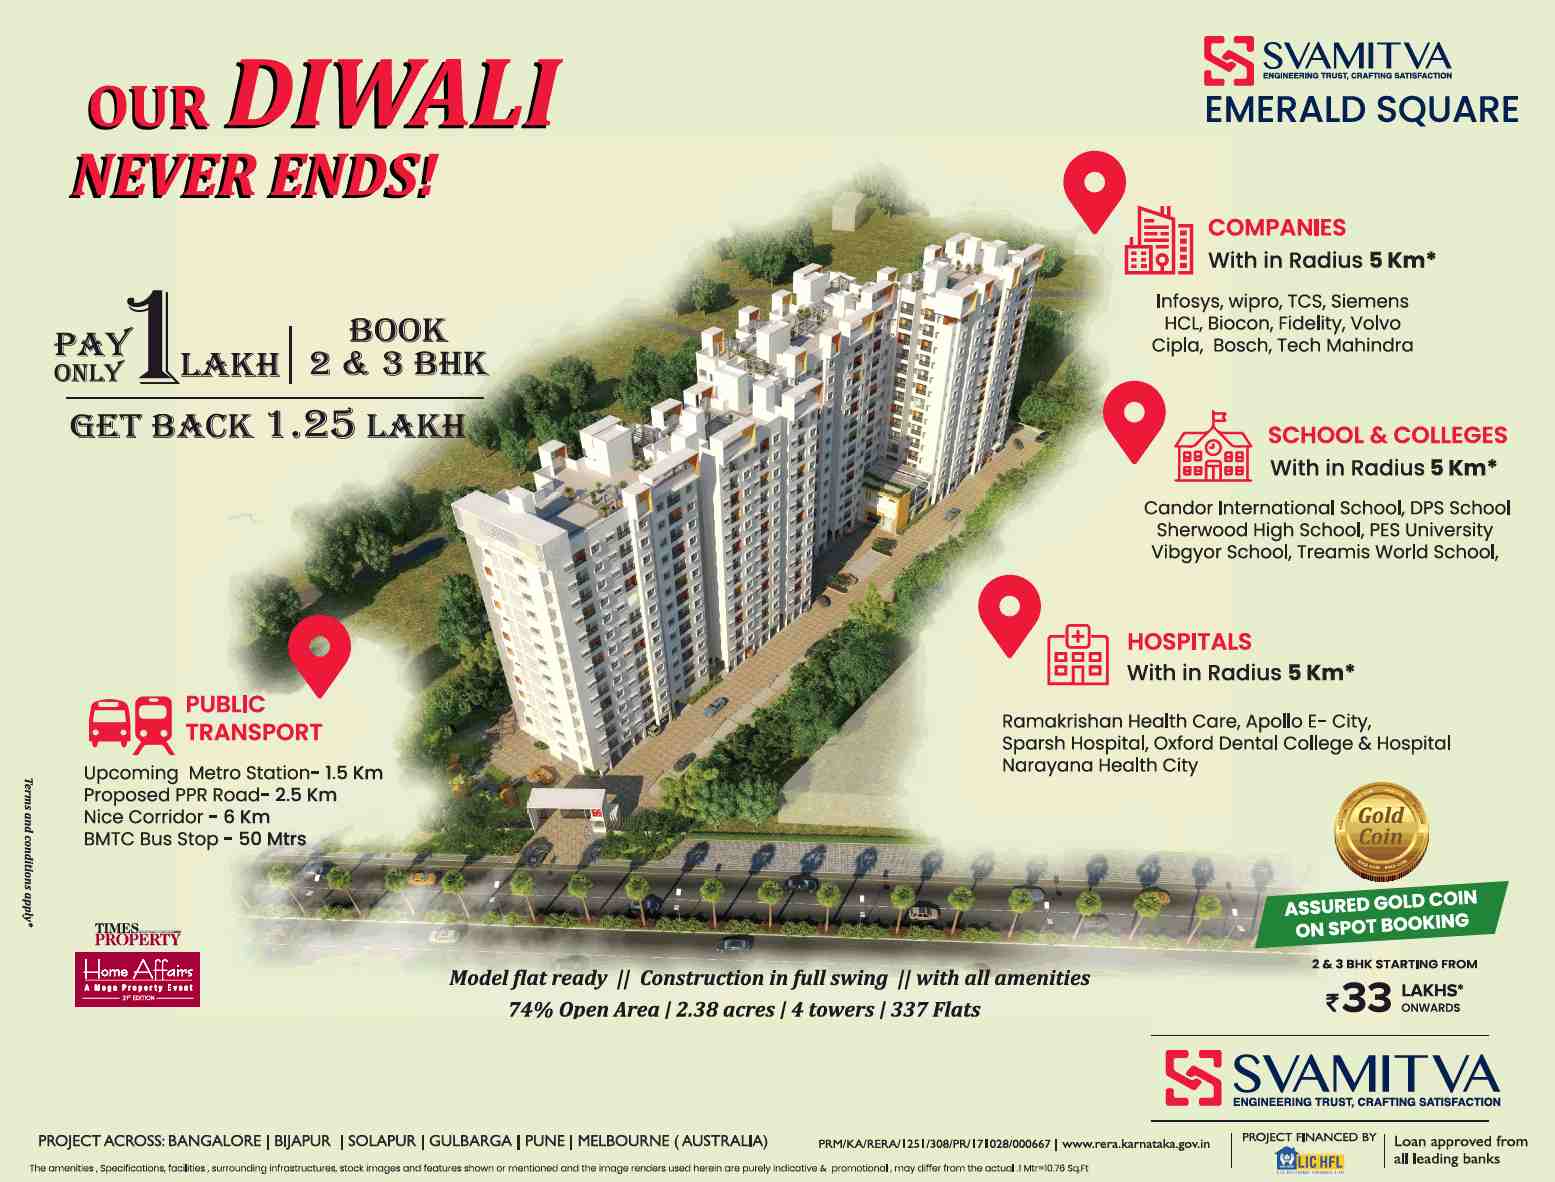 Pay only Rs. 1 Lakh & book your home at Svamitva Emerald Square in Bangalore Update